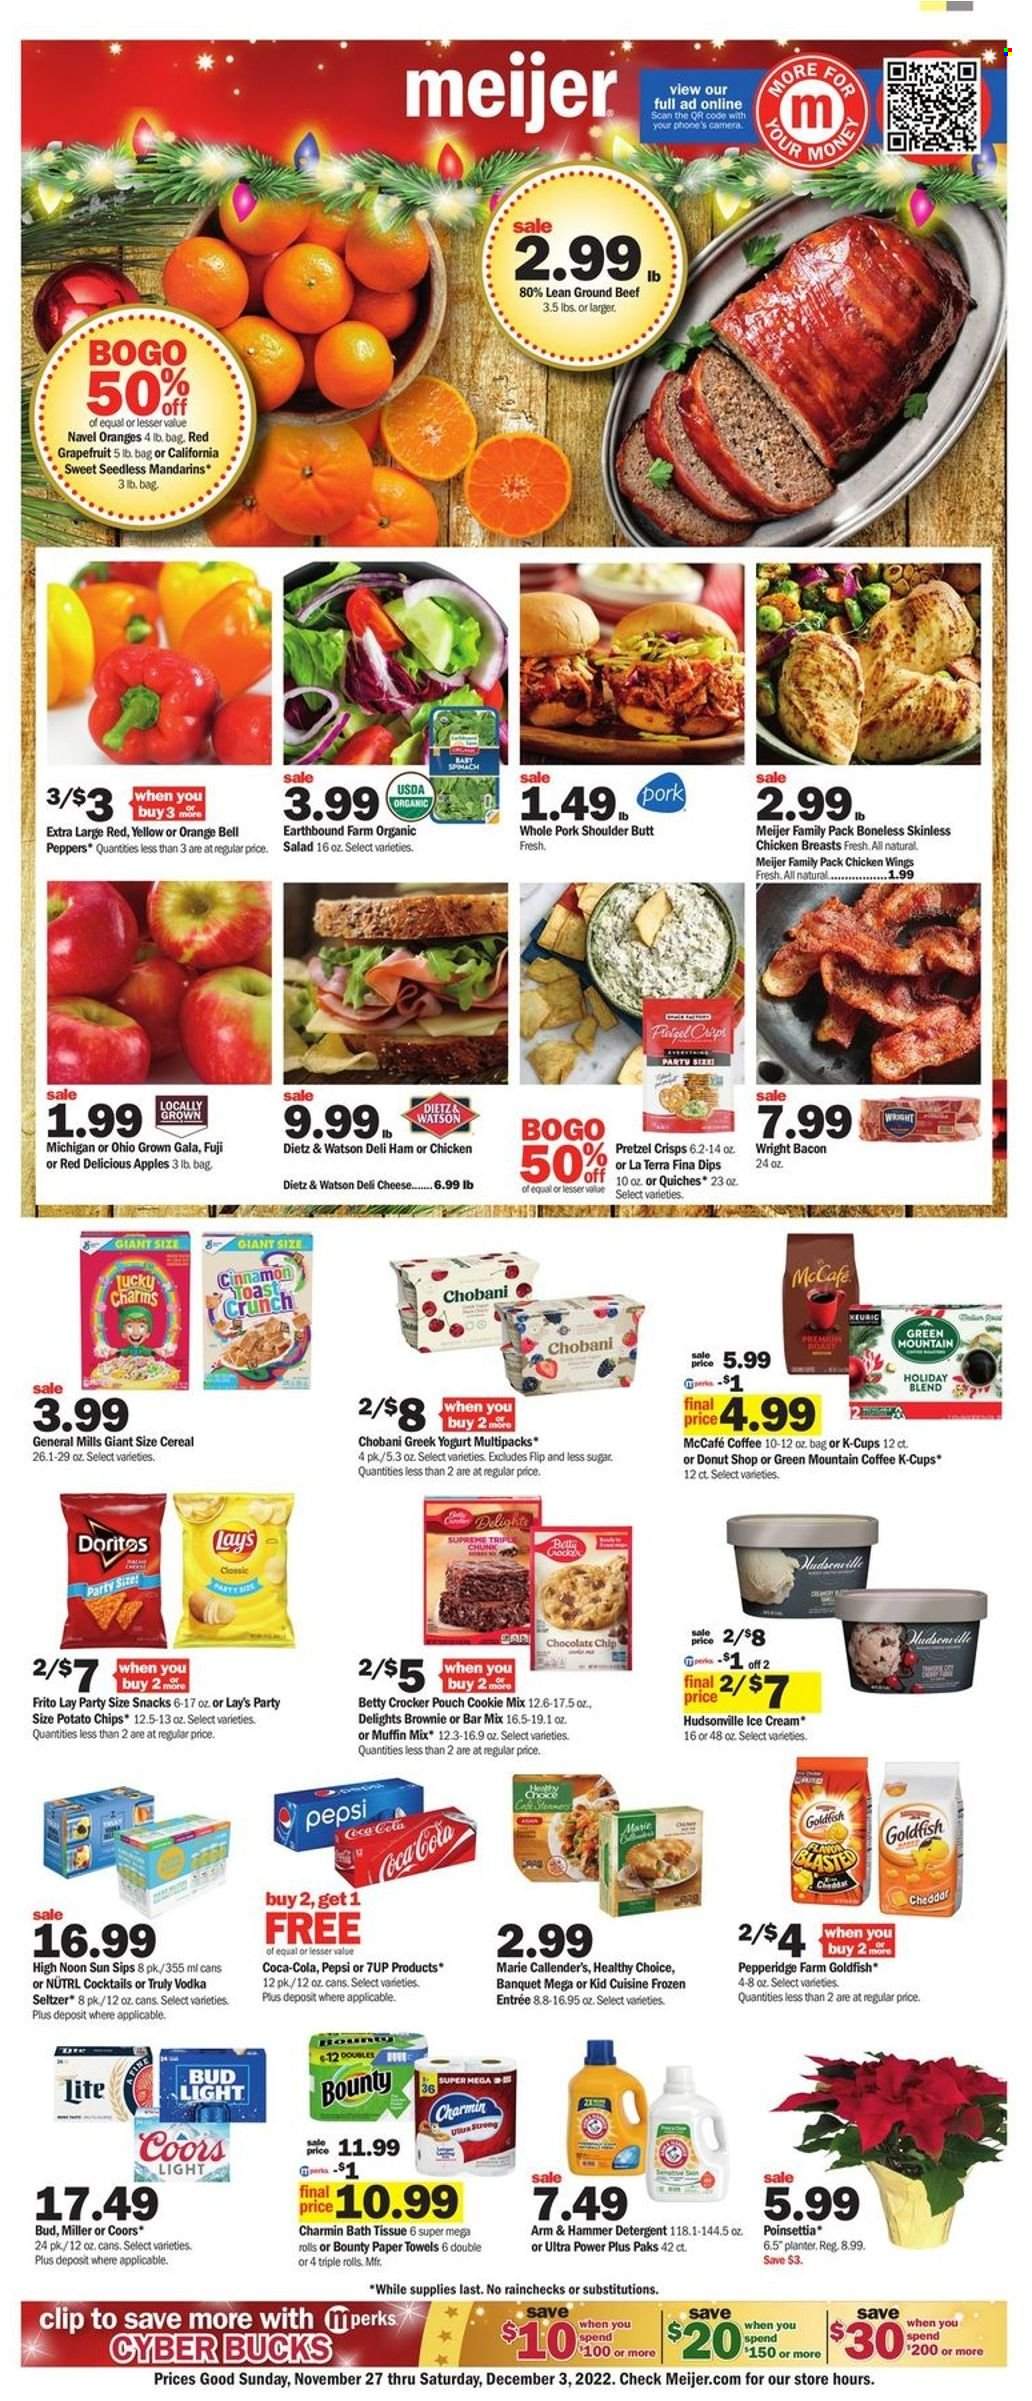 thumbnail - Meijer Flyer - 11/27/2022 - 12/03/2022 - Sales products - brownies, muffin mix, bell peppers, salad, peppers, apples, Gala, grapefruits, mandarines, Red Delicious apples, oranges, Healthy Choice, Marie Callender's, bacon, ham, Dietz & Watson, cheese, greek yoghurt, yoghurt, Chobani, ice cream, chicken wings, snack, Bounty, Doritos, potato chips, Lay’s, Goldfish, pretzel crisps, ARM & HAMMER, cereals, cinnamon, Coca-Cola, Pepsi, 7UP, coffee, coffee capsules, McCafe, K-Cups, Green Mountain, vodka, TRULY, beer, Bud Light, Miller, beef meat, ground beef, pork meat, pork shoulder, bath tissue, kitchen towels, paper towels, Charmin, detergent, poinsettia, Coors, navel oranges. Page 1.